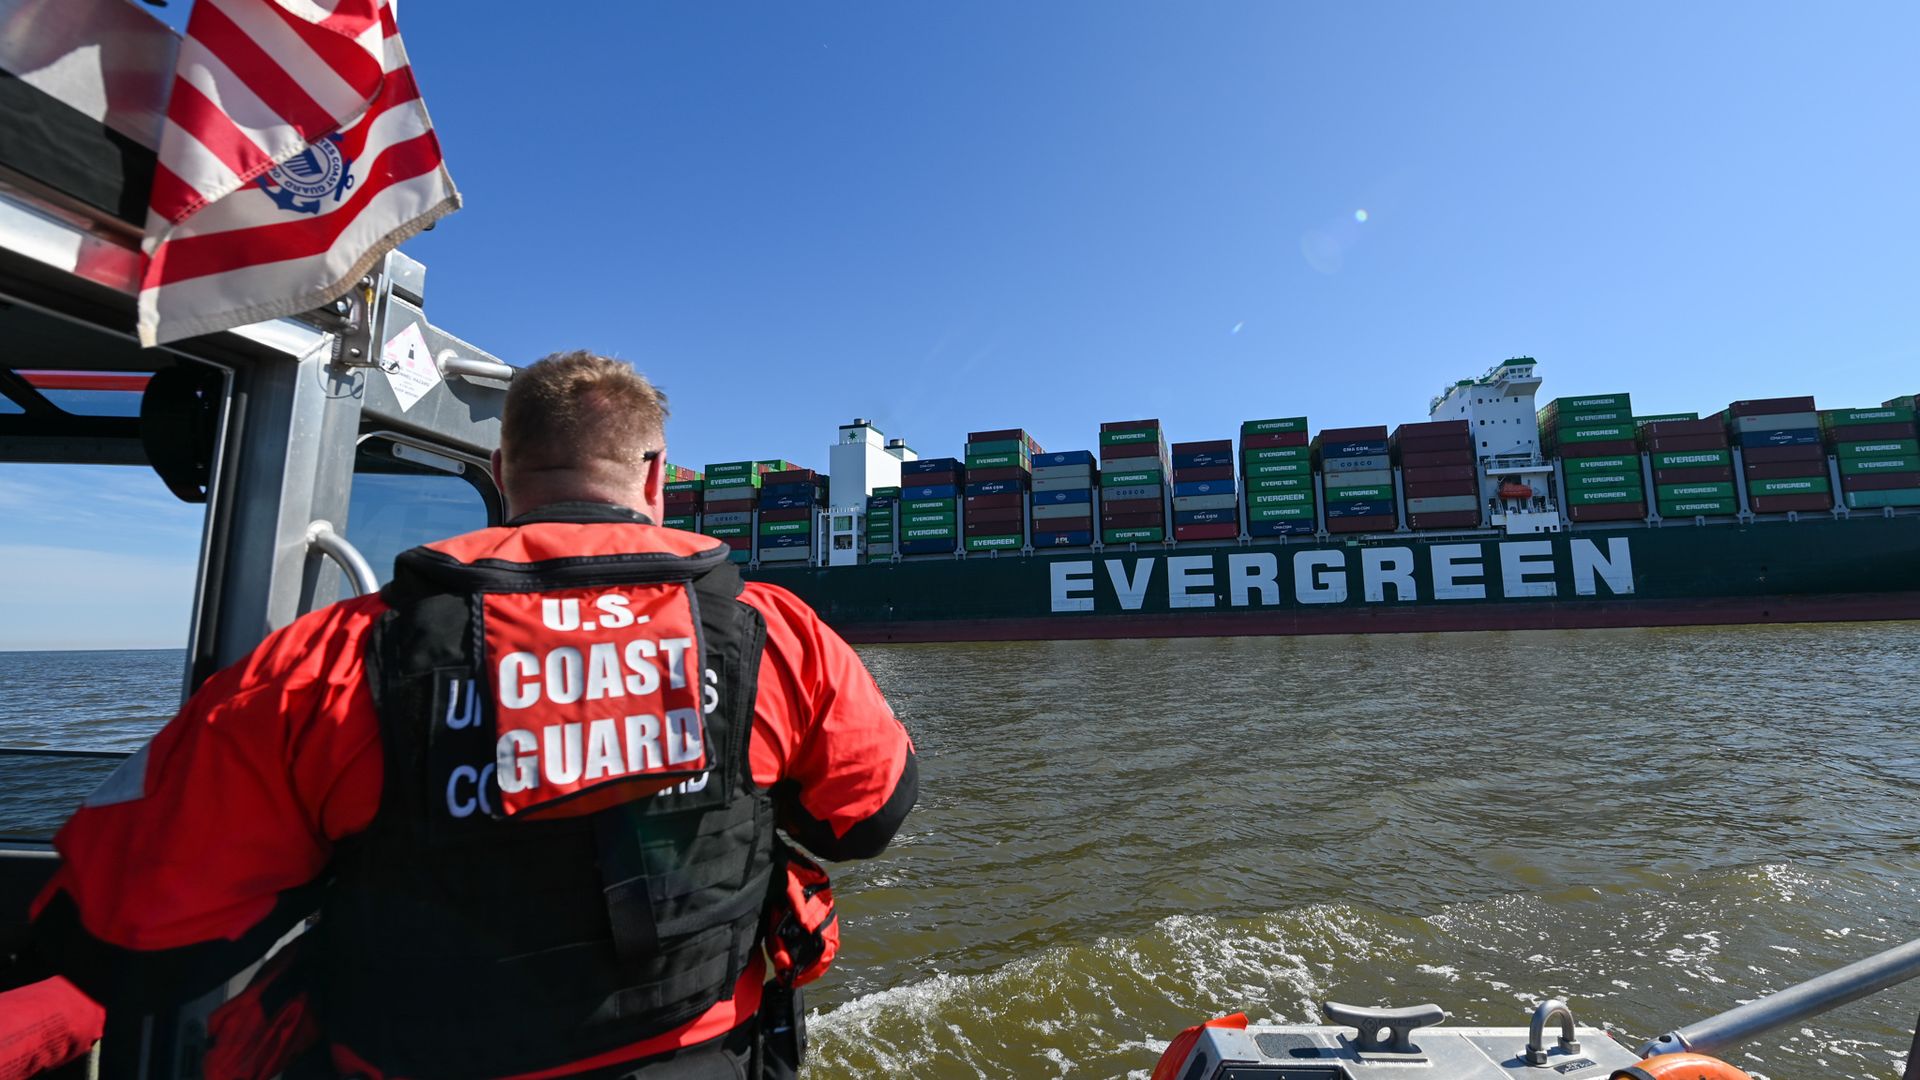 A Coast Guard grew monitors the Ever Forward, which is grounded in thee Chesapeake Bay.